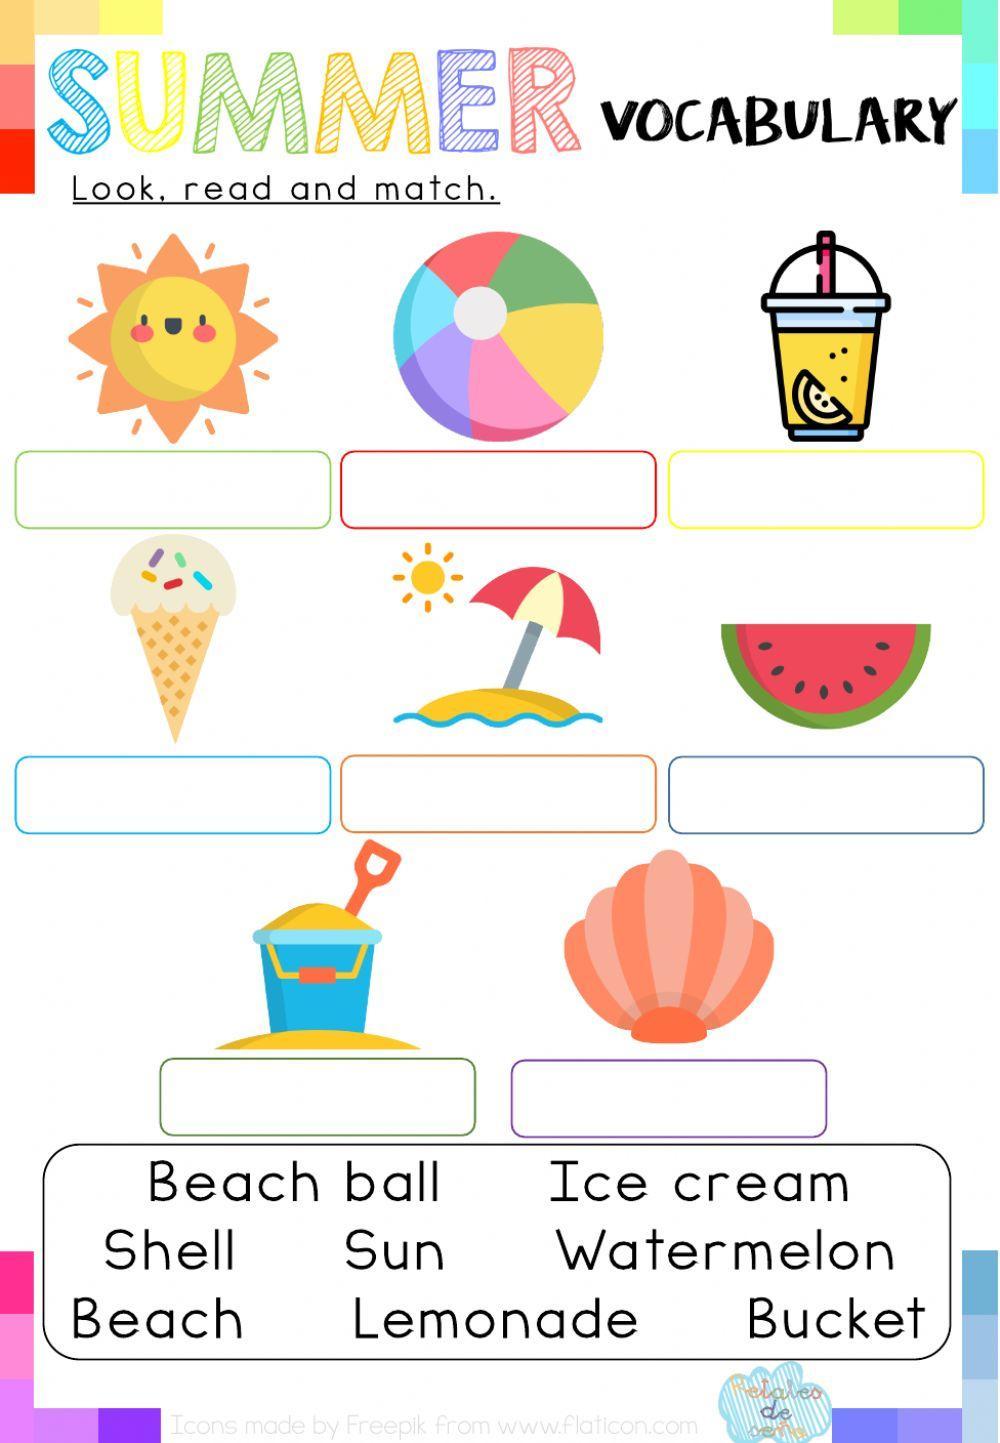 Look, read and match: Summer Vocabulary